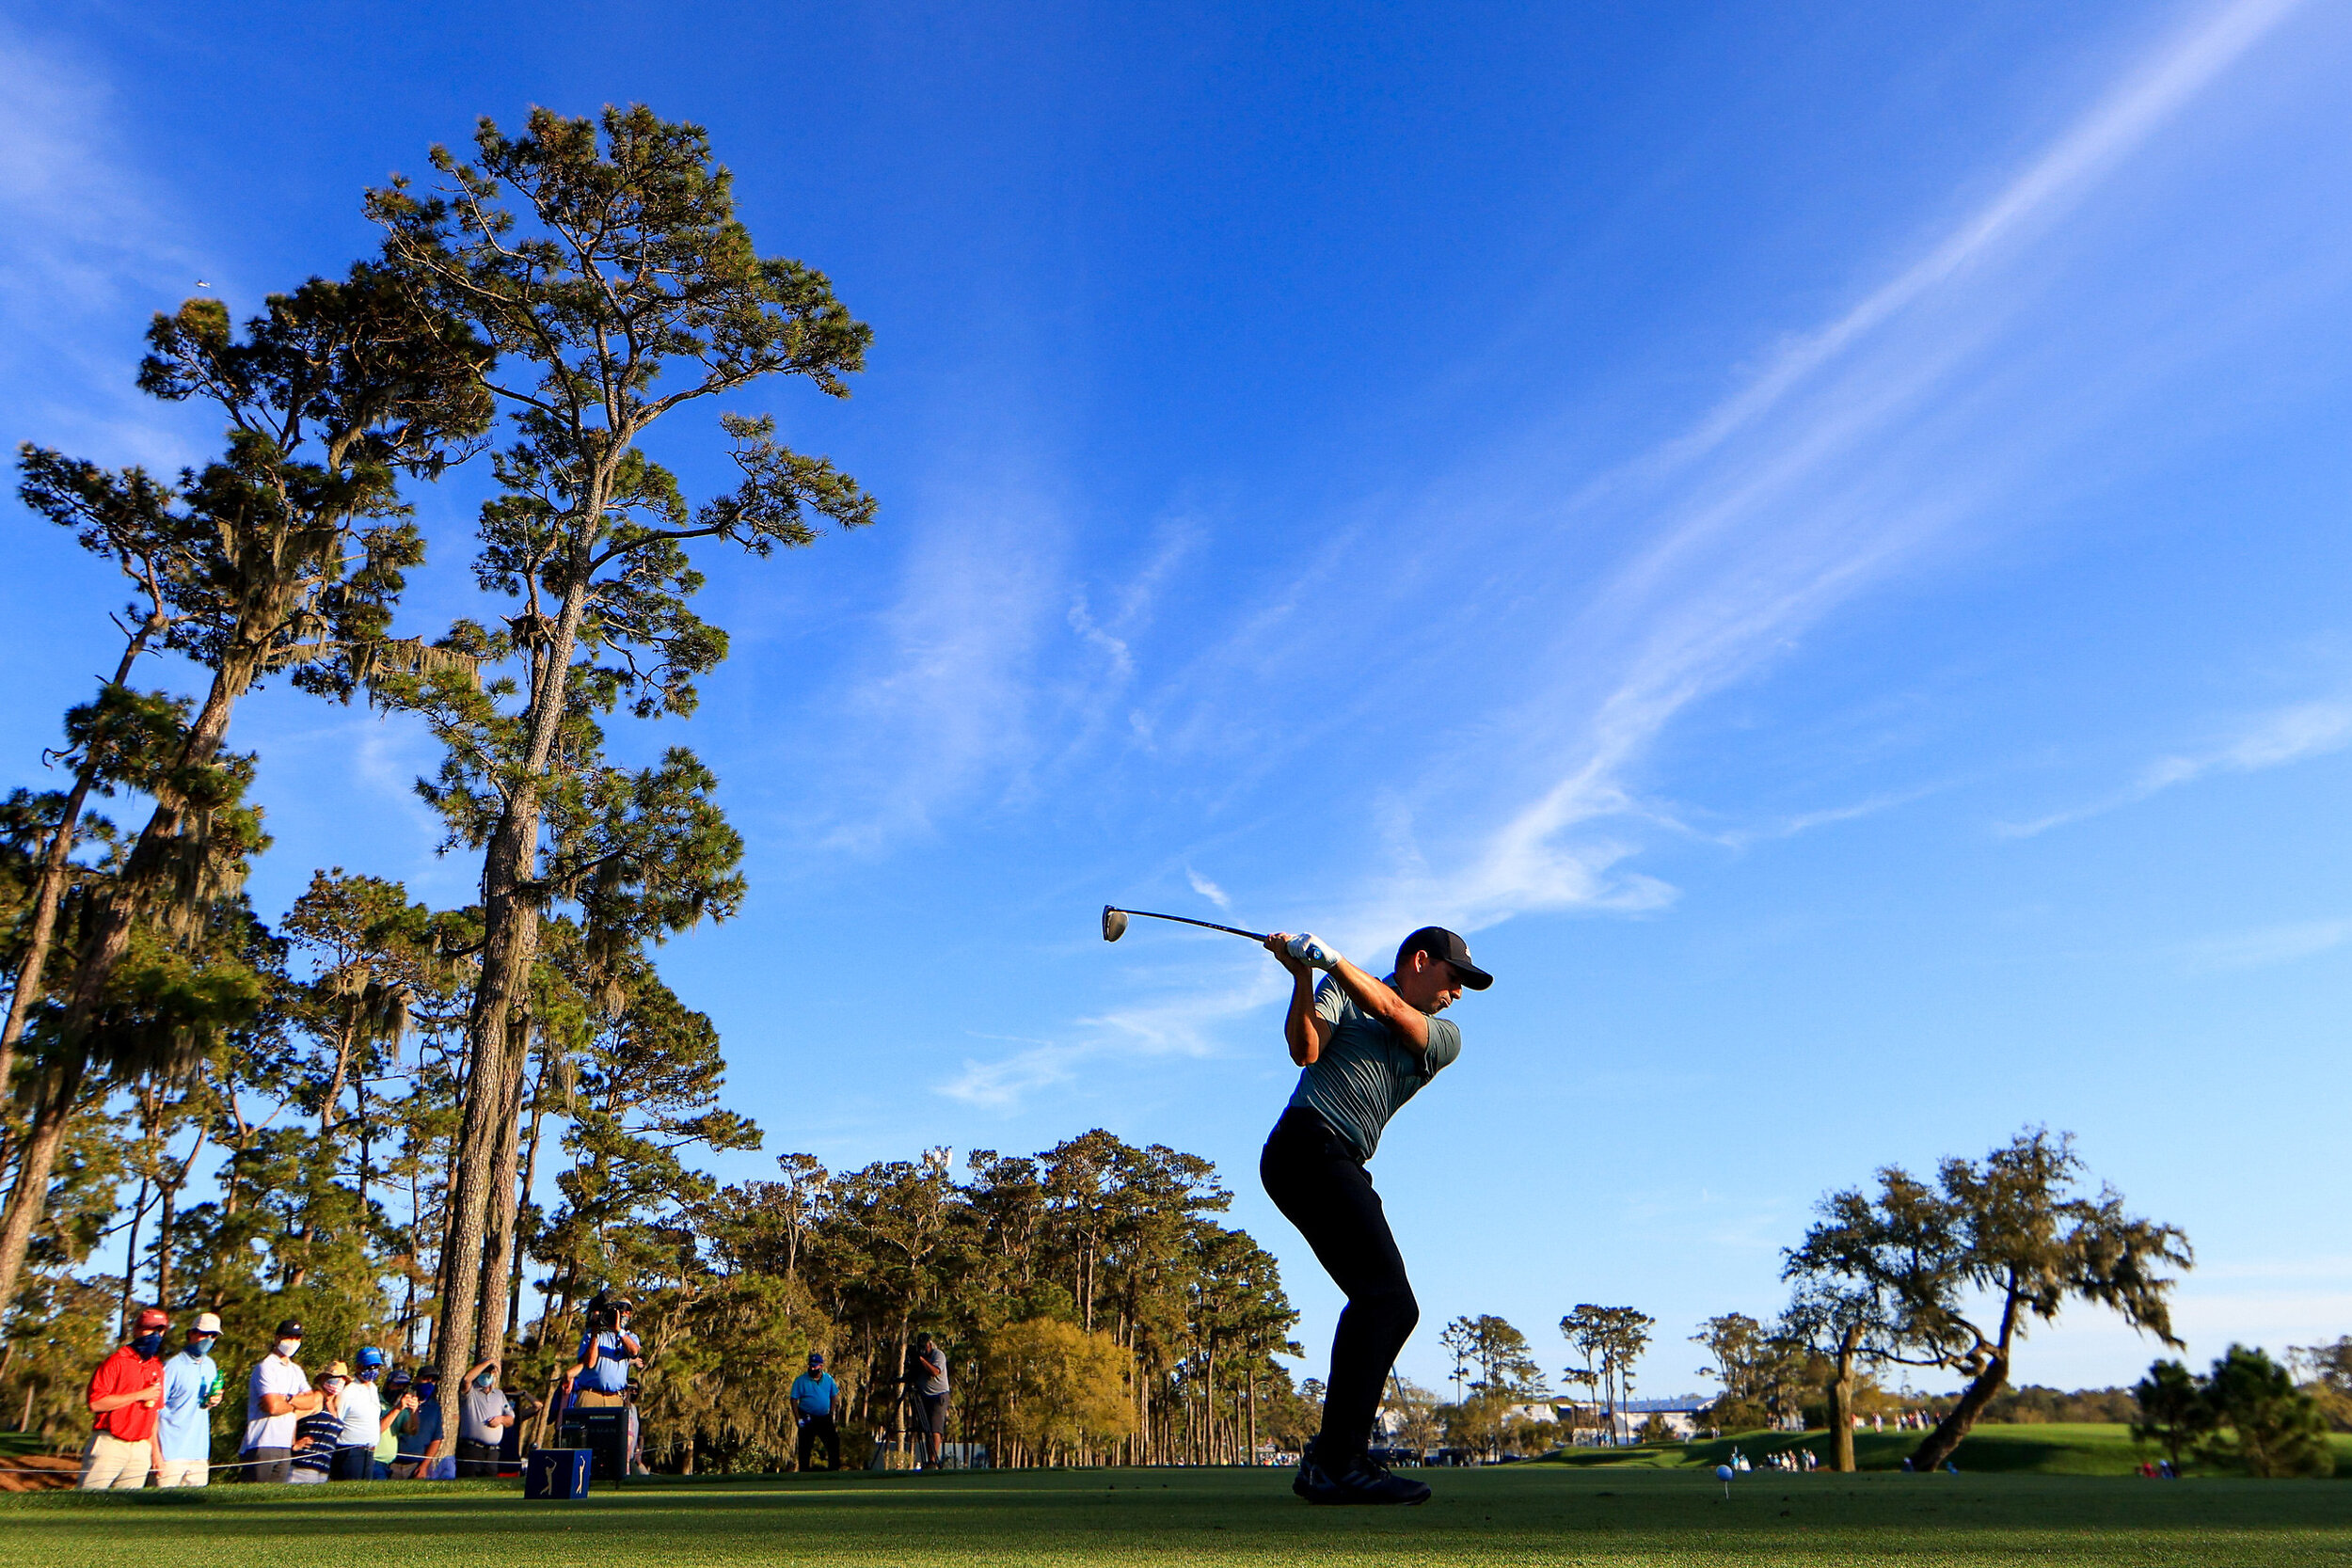  PONTE VEDRA BEACH, FLORIDA - MARCH 12: Sergio Garcia of Spain plays his shot from the 16th tee during the second round of THE PLAYERS Championship on THE PLAYERS Stadium Course at TPC Sawgrass on March 12, 2021 in Ponte Vedra Beach, Florida. (Photo 